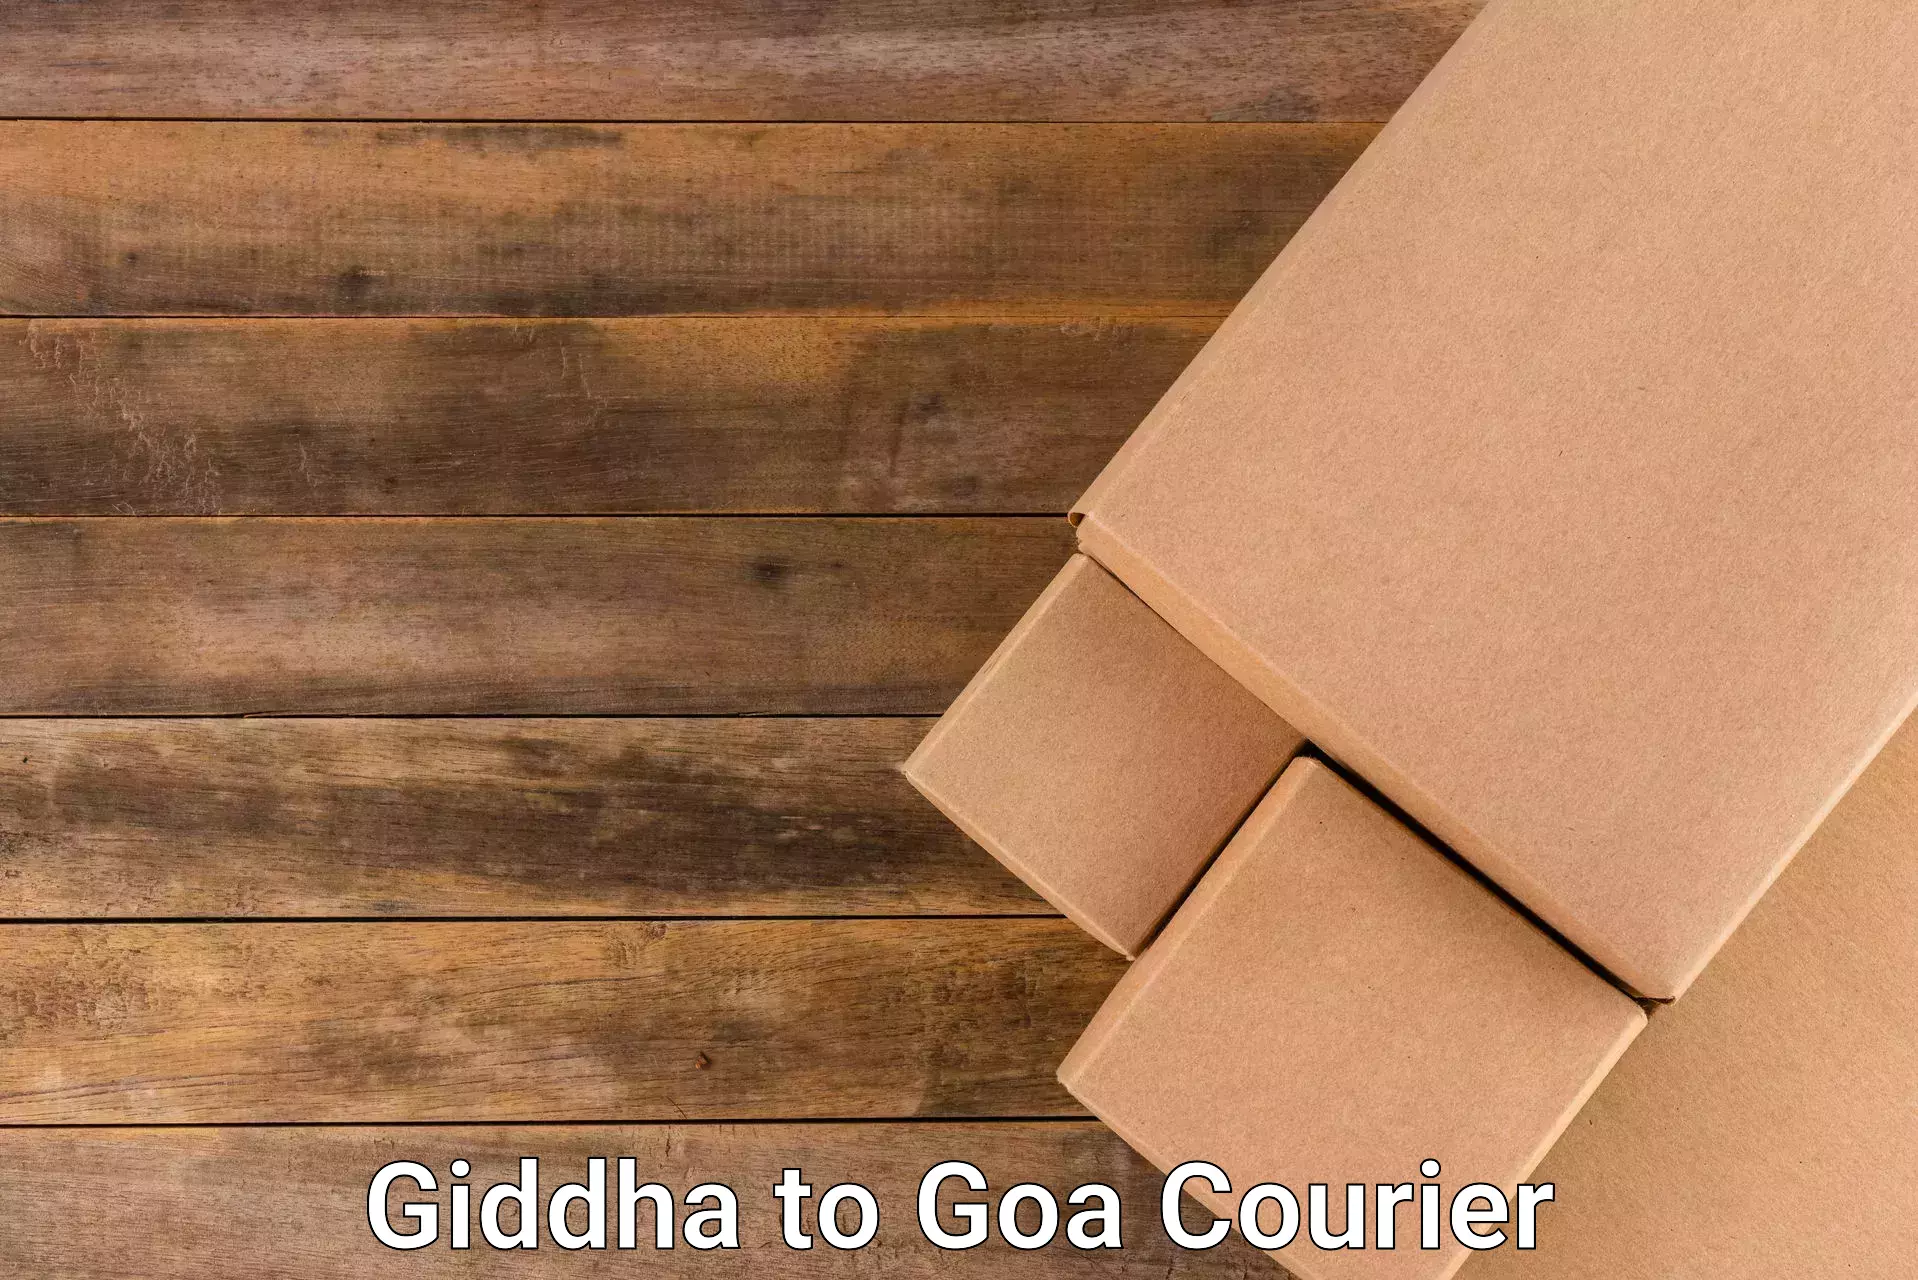 State-of-the-art courier technology Giddha to Goa